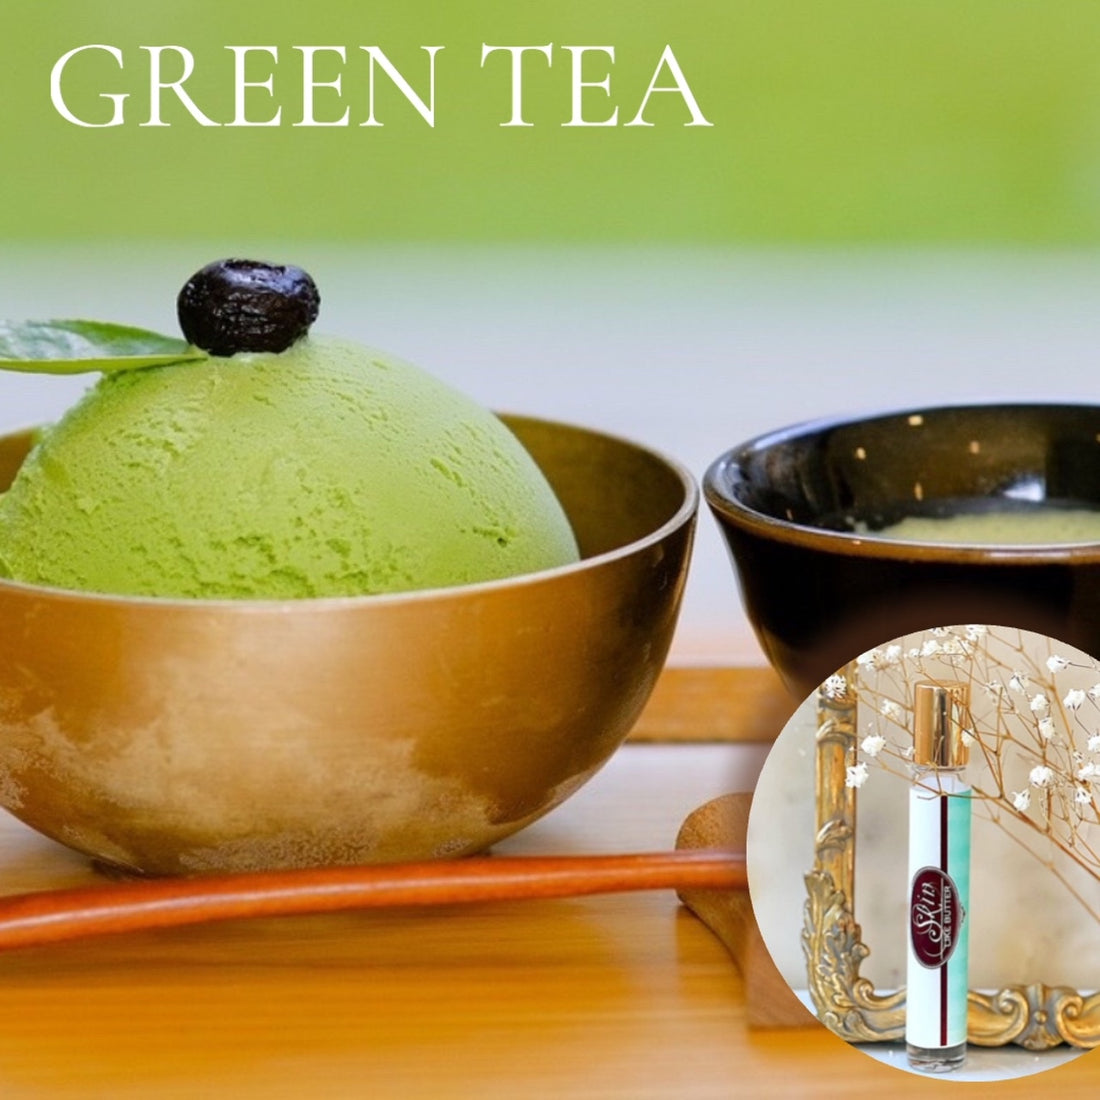 GREEN TEA Roll on Perfume Sale! ~ Buy 1 get one 50% off-use coupon code 2PLEASE